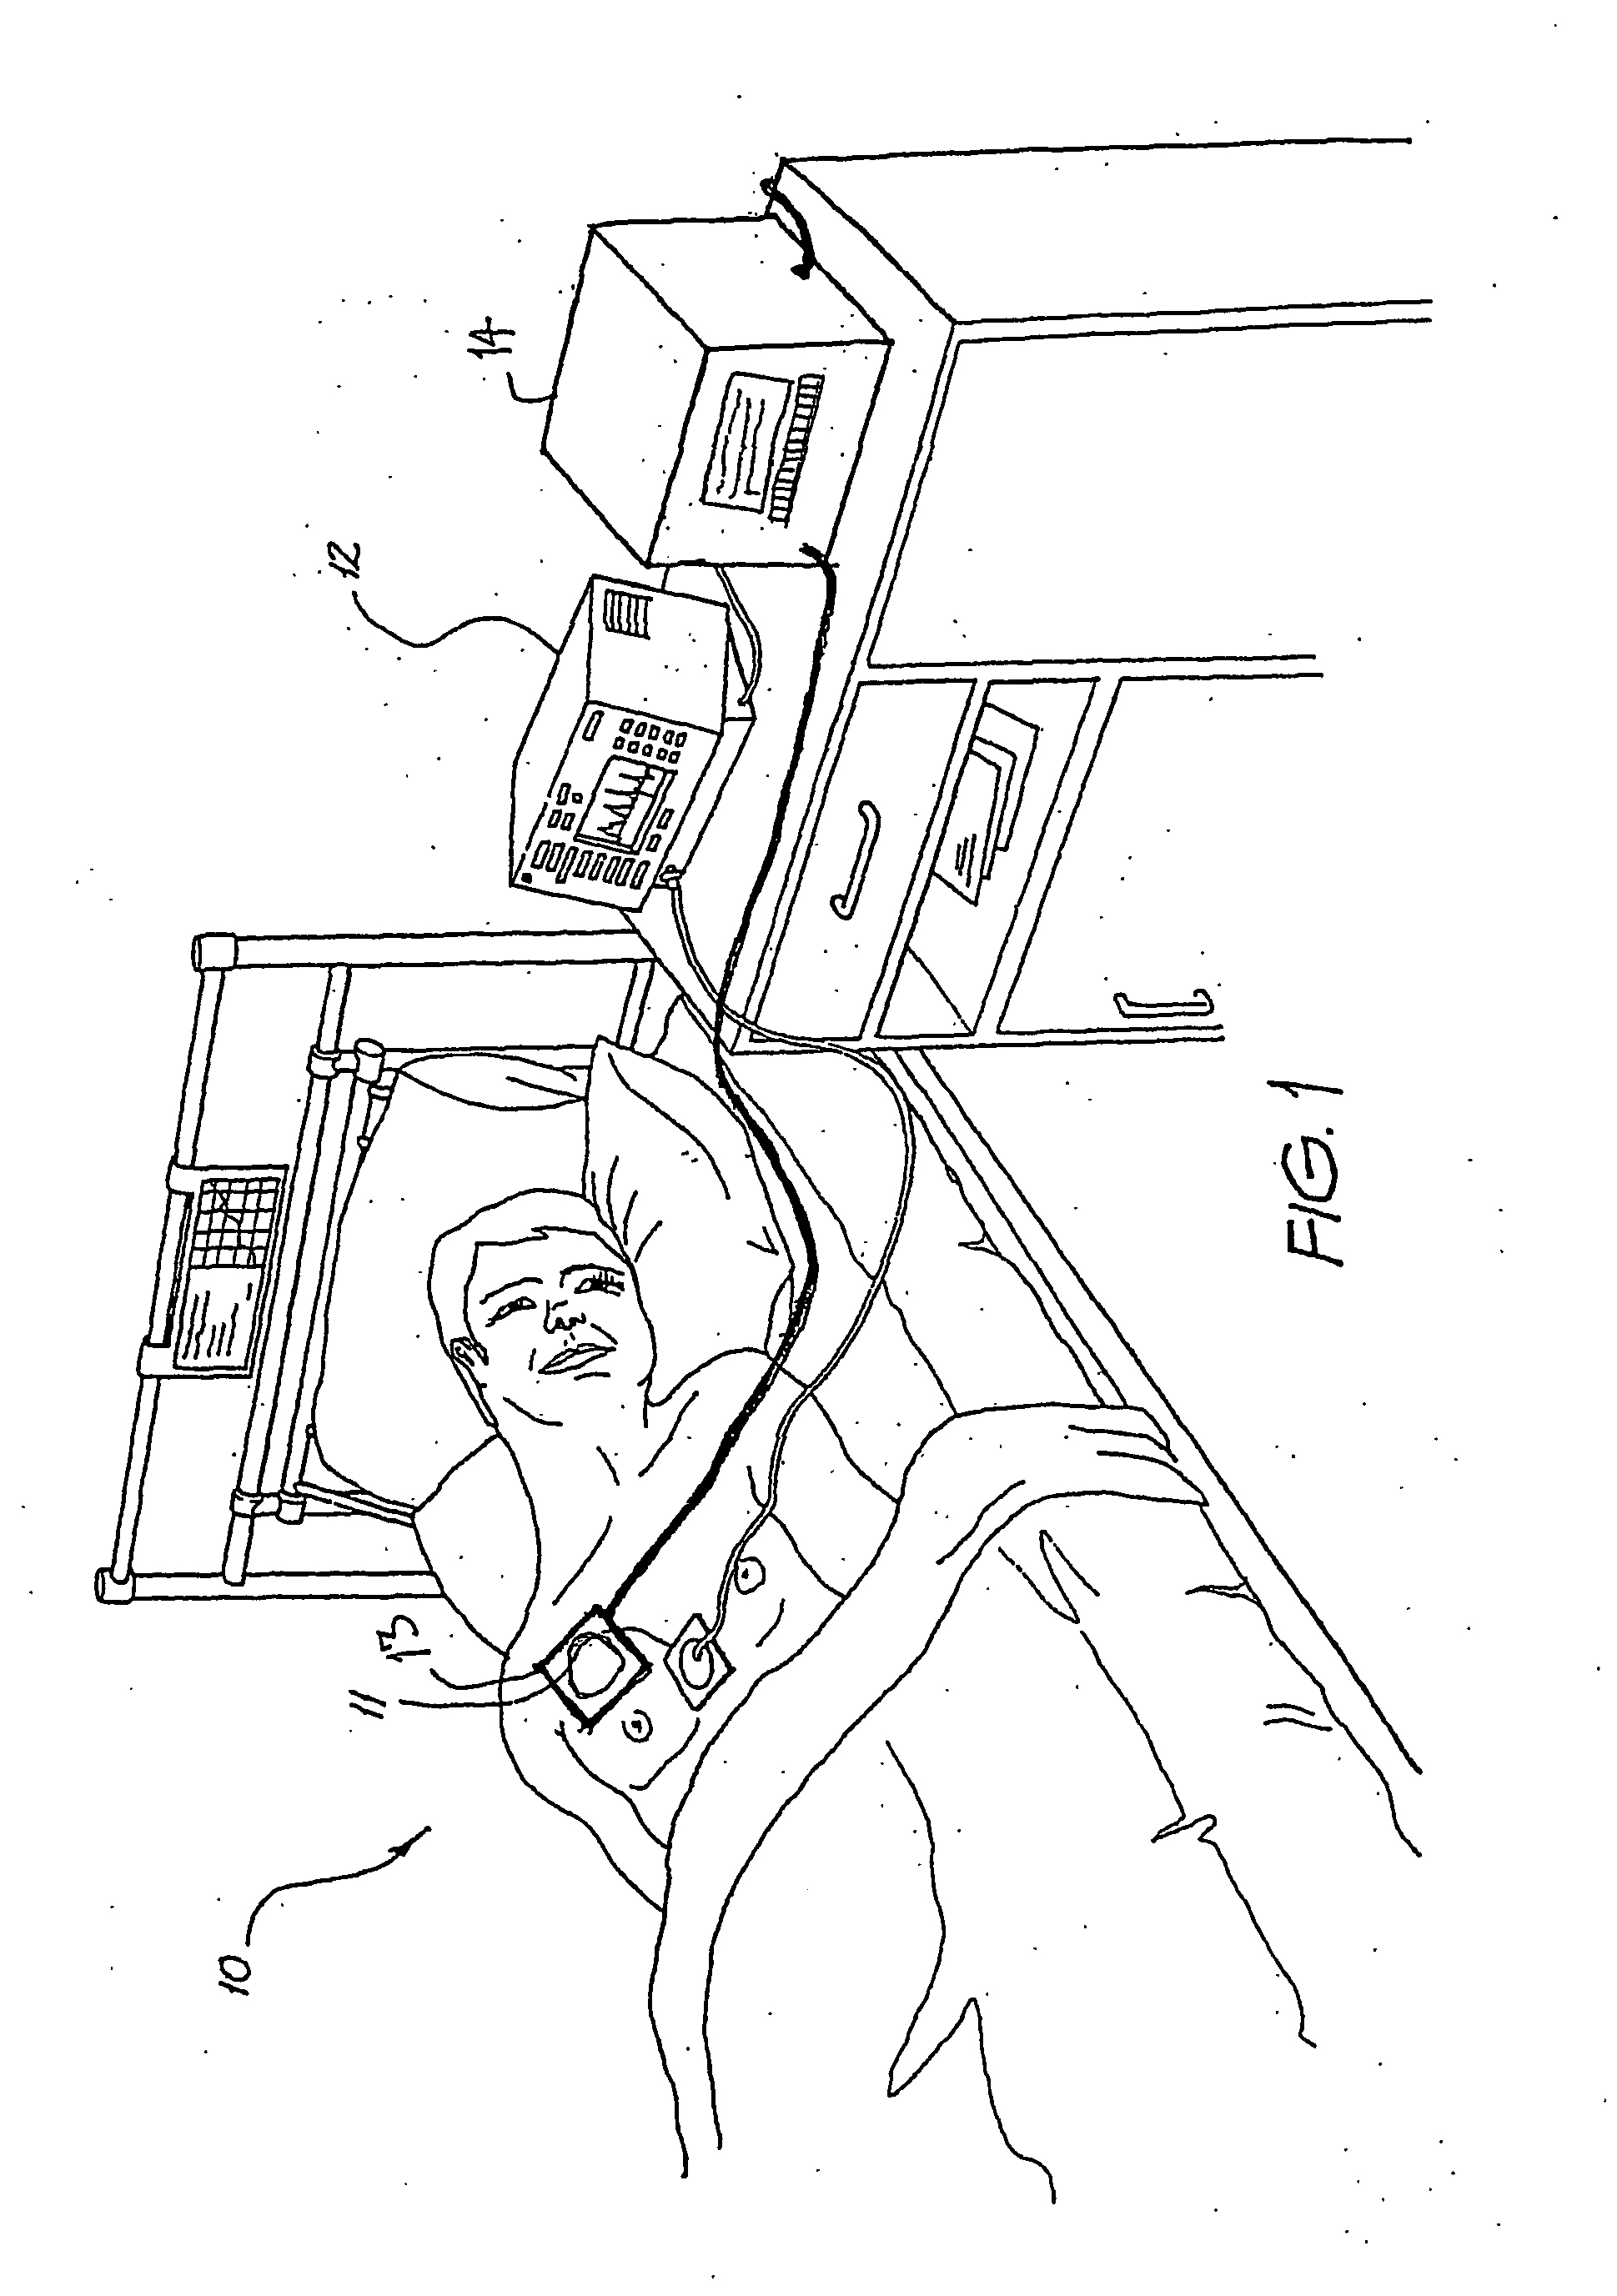 Pacemaker evaluation method and apparatus